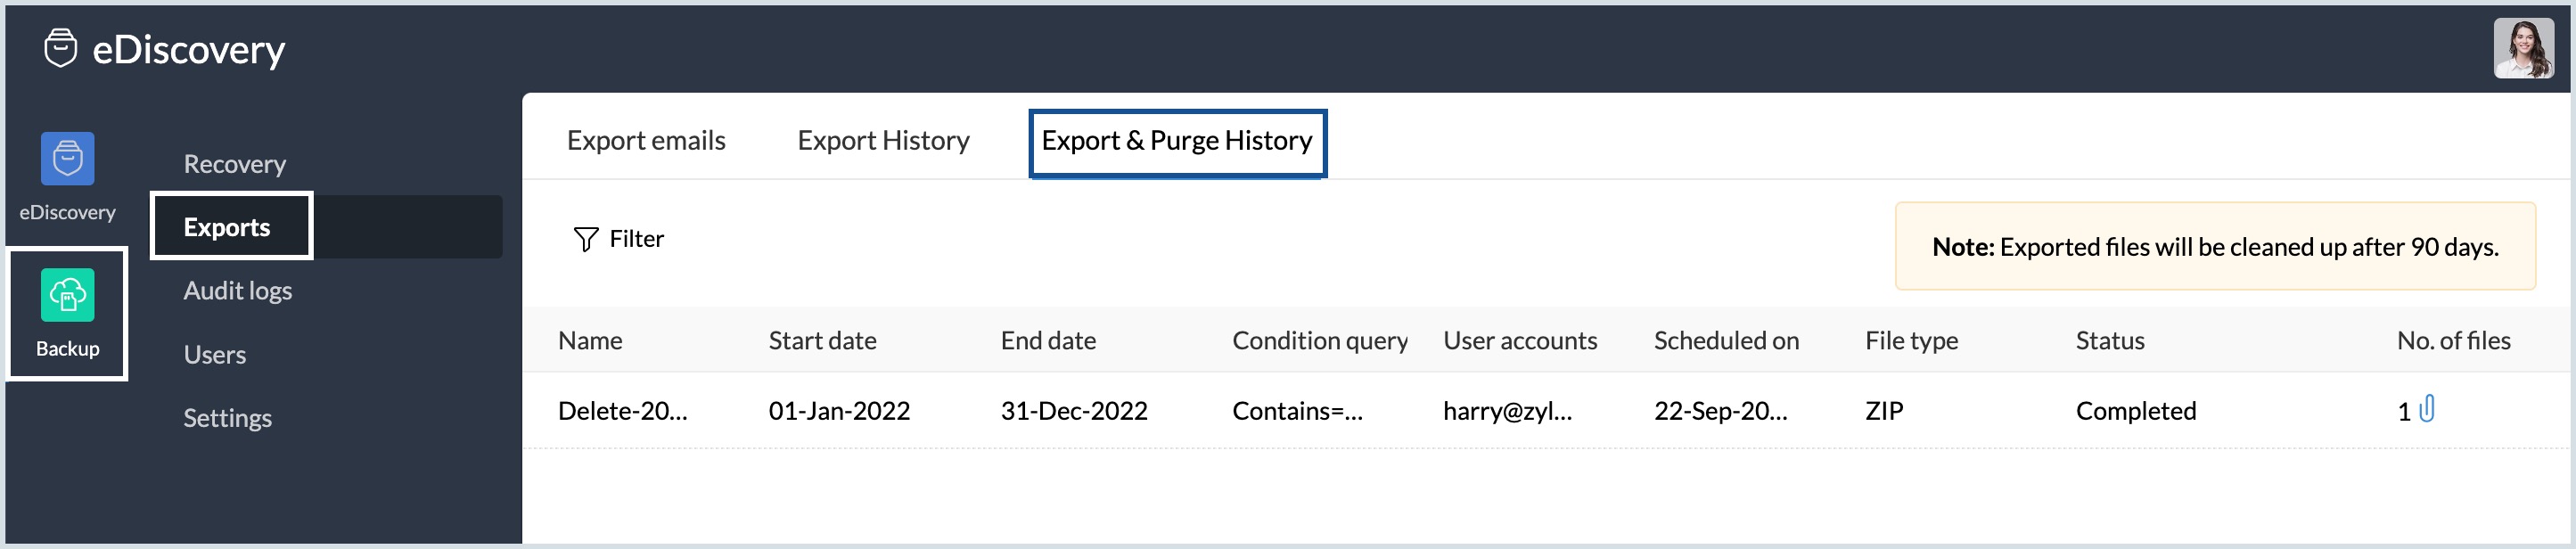 export and purge history